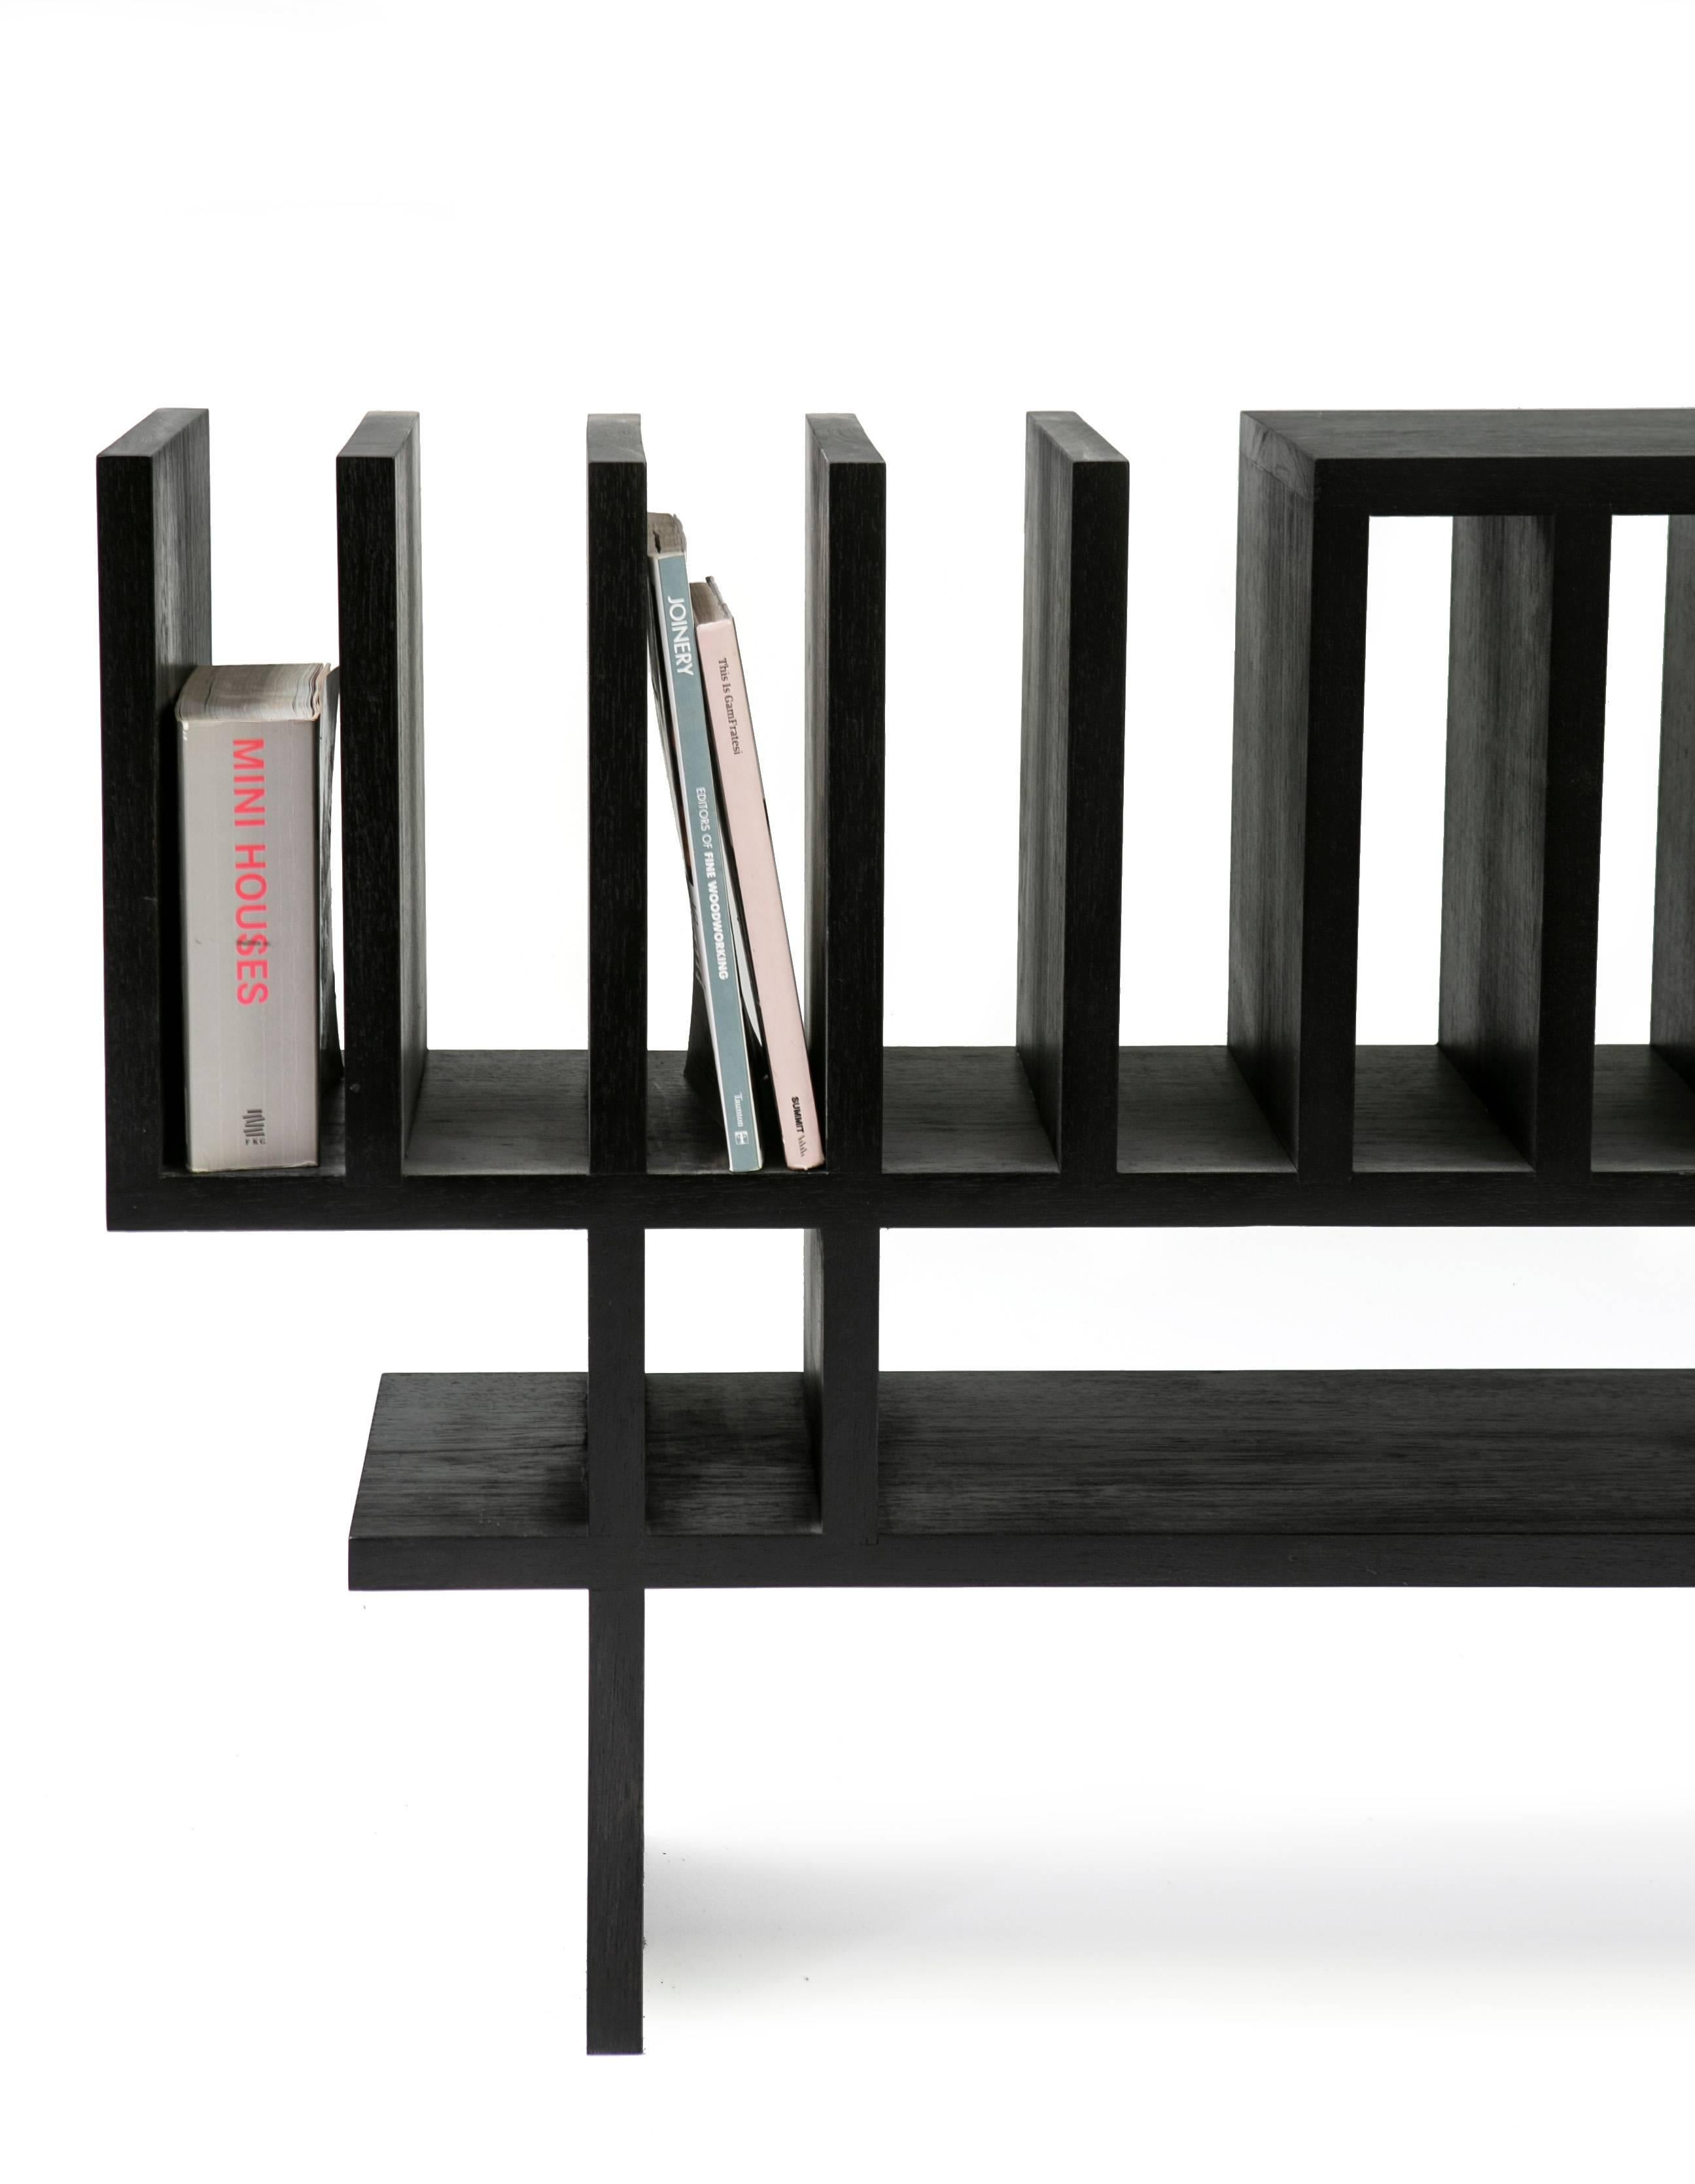 Minimalist buffet, can be a book shelf, or console table. Handcrafted in Brazilian Hardwood Freijó
Available in natural wood or painted black finish.
Dimensions:
Depth x width x height
10.62 x 78.74 x 28.34.